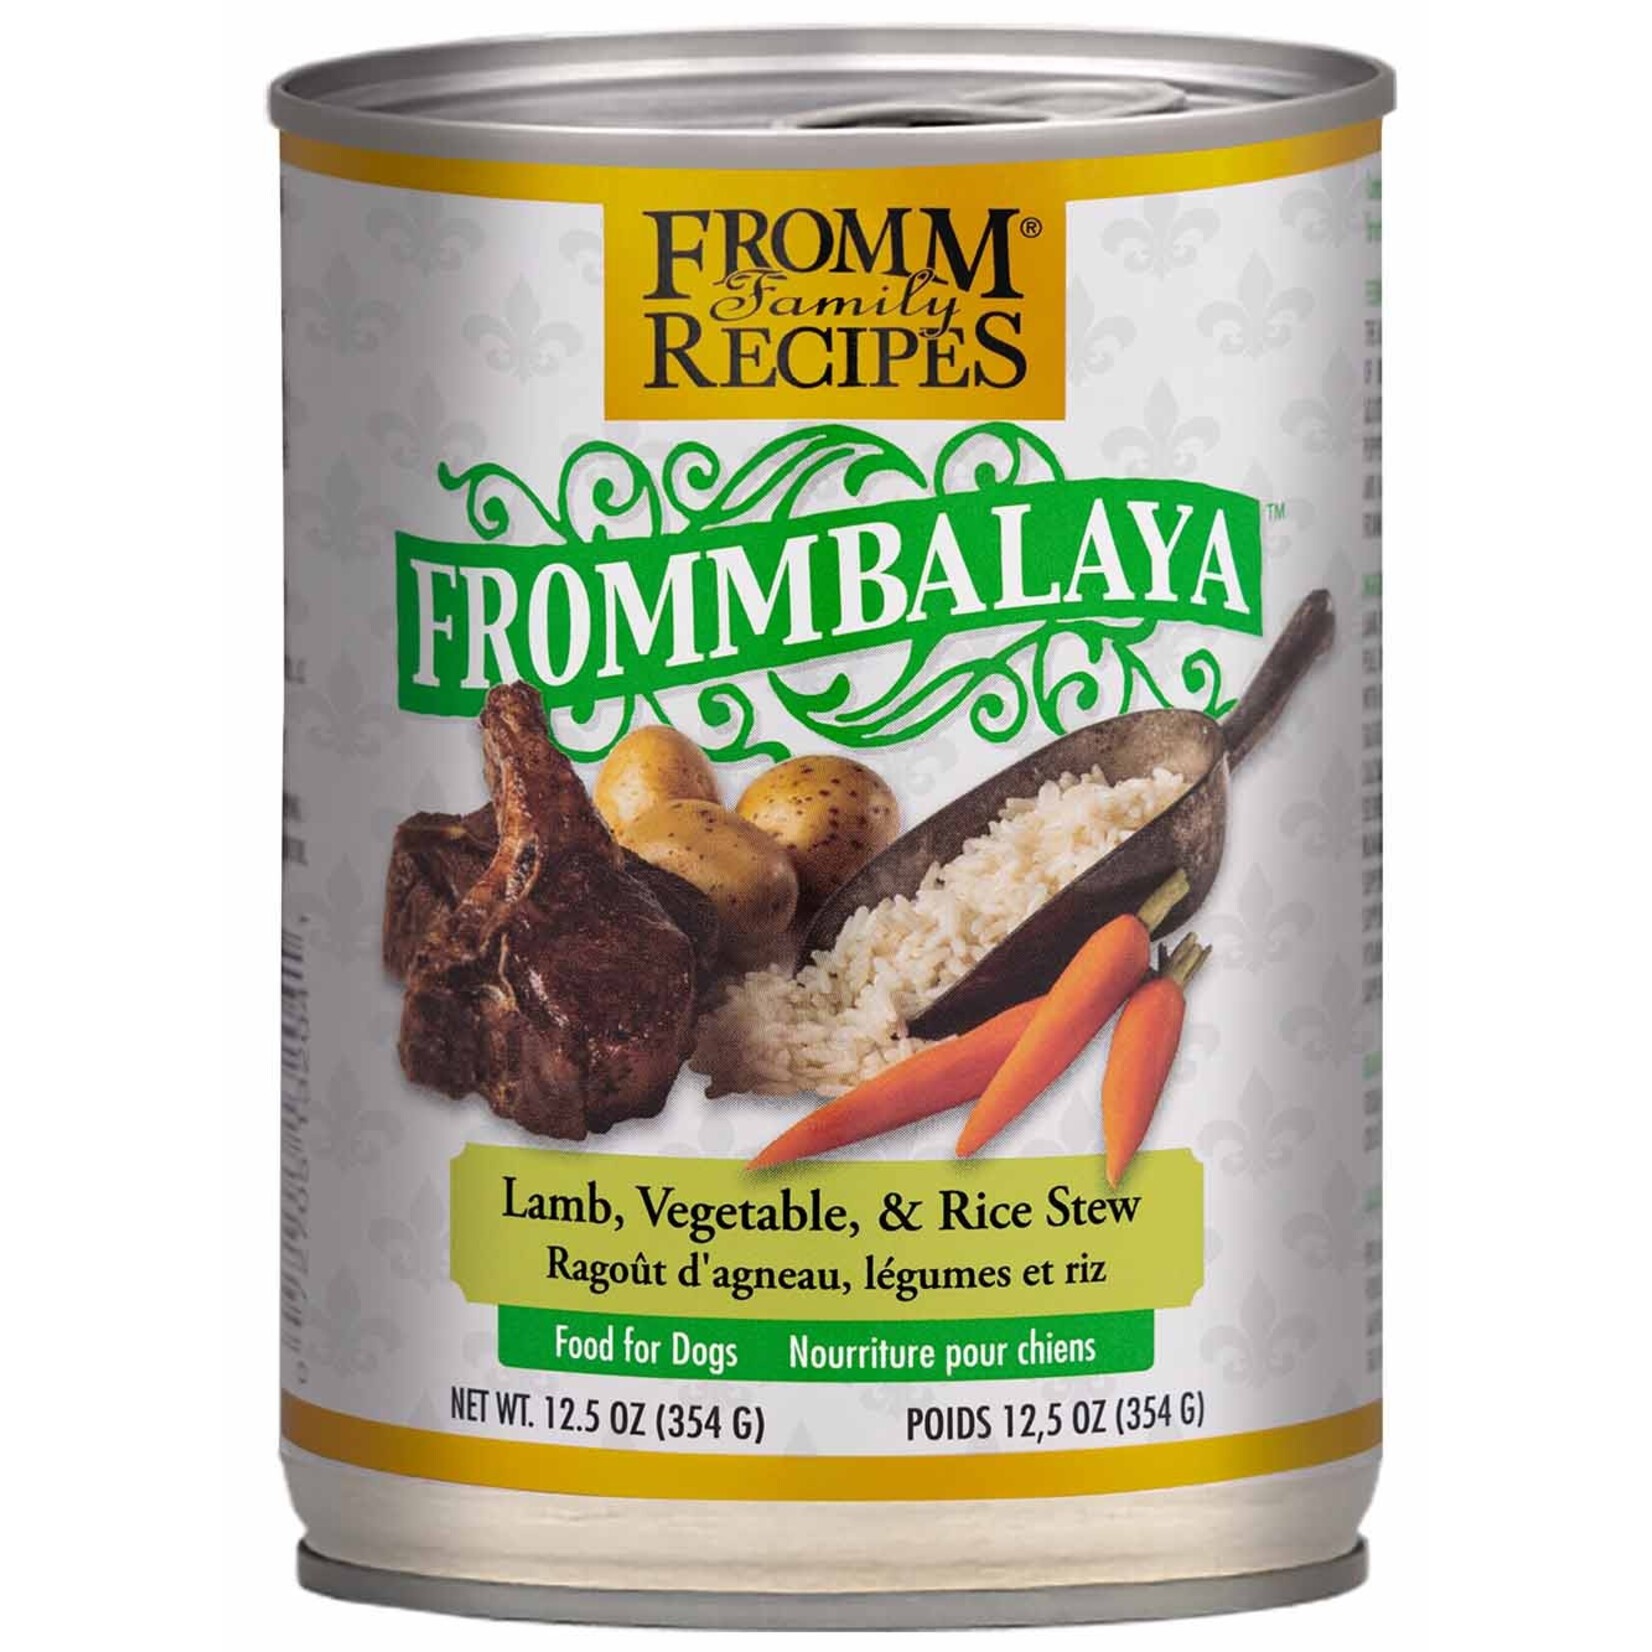 Fromm Frommbalaya Lamb, Vegetable, and Rice Stew Wet Dog Food, 12.5oz